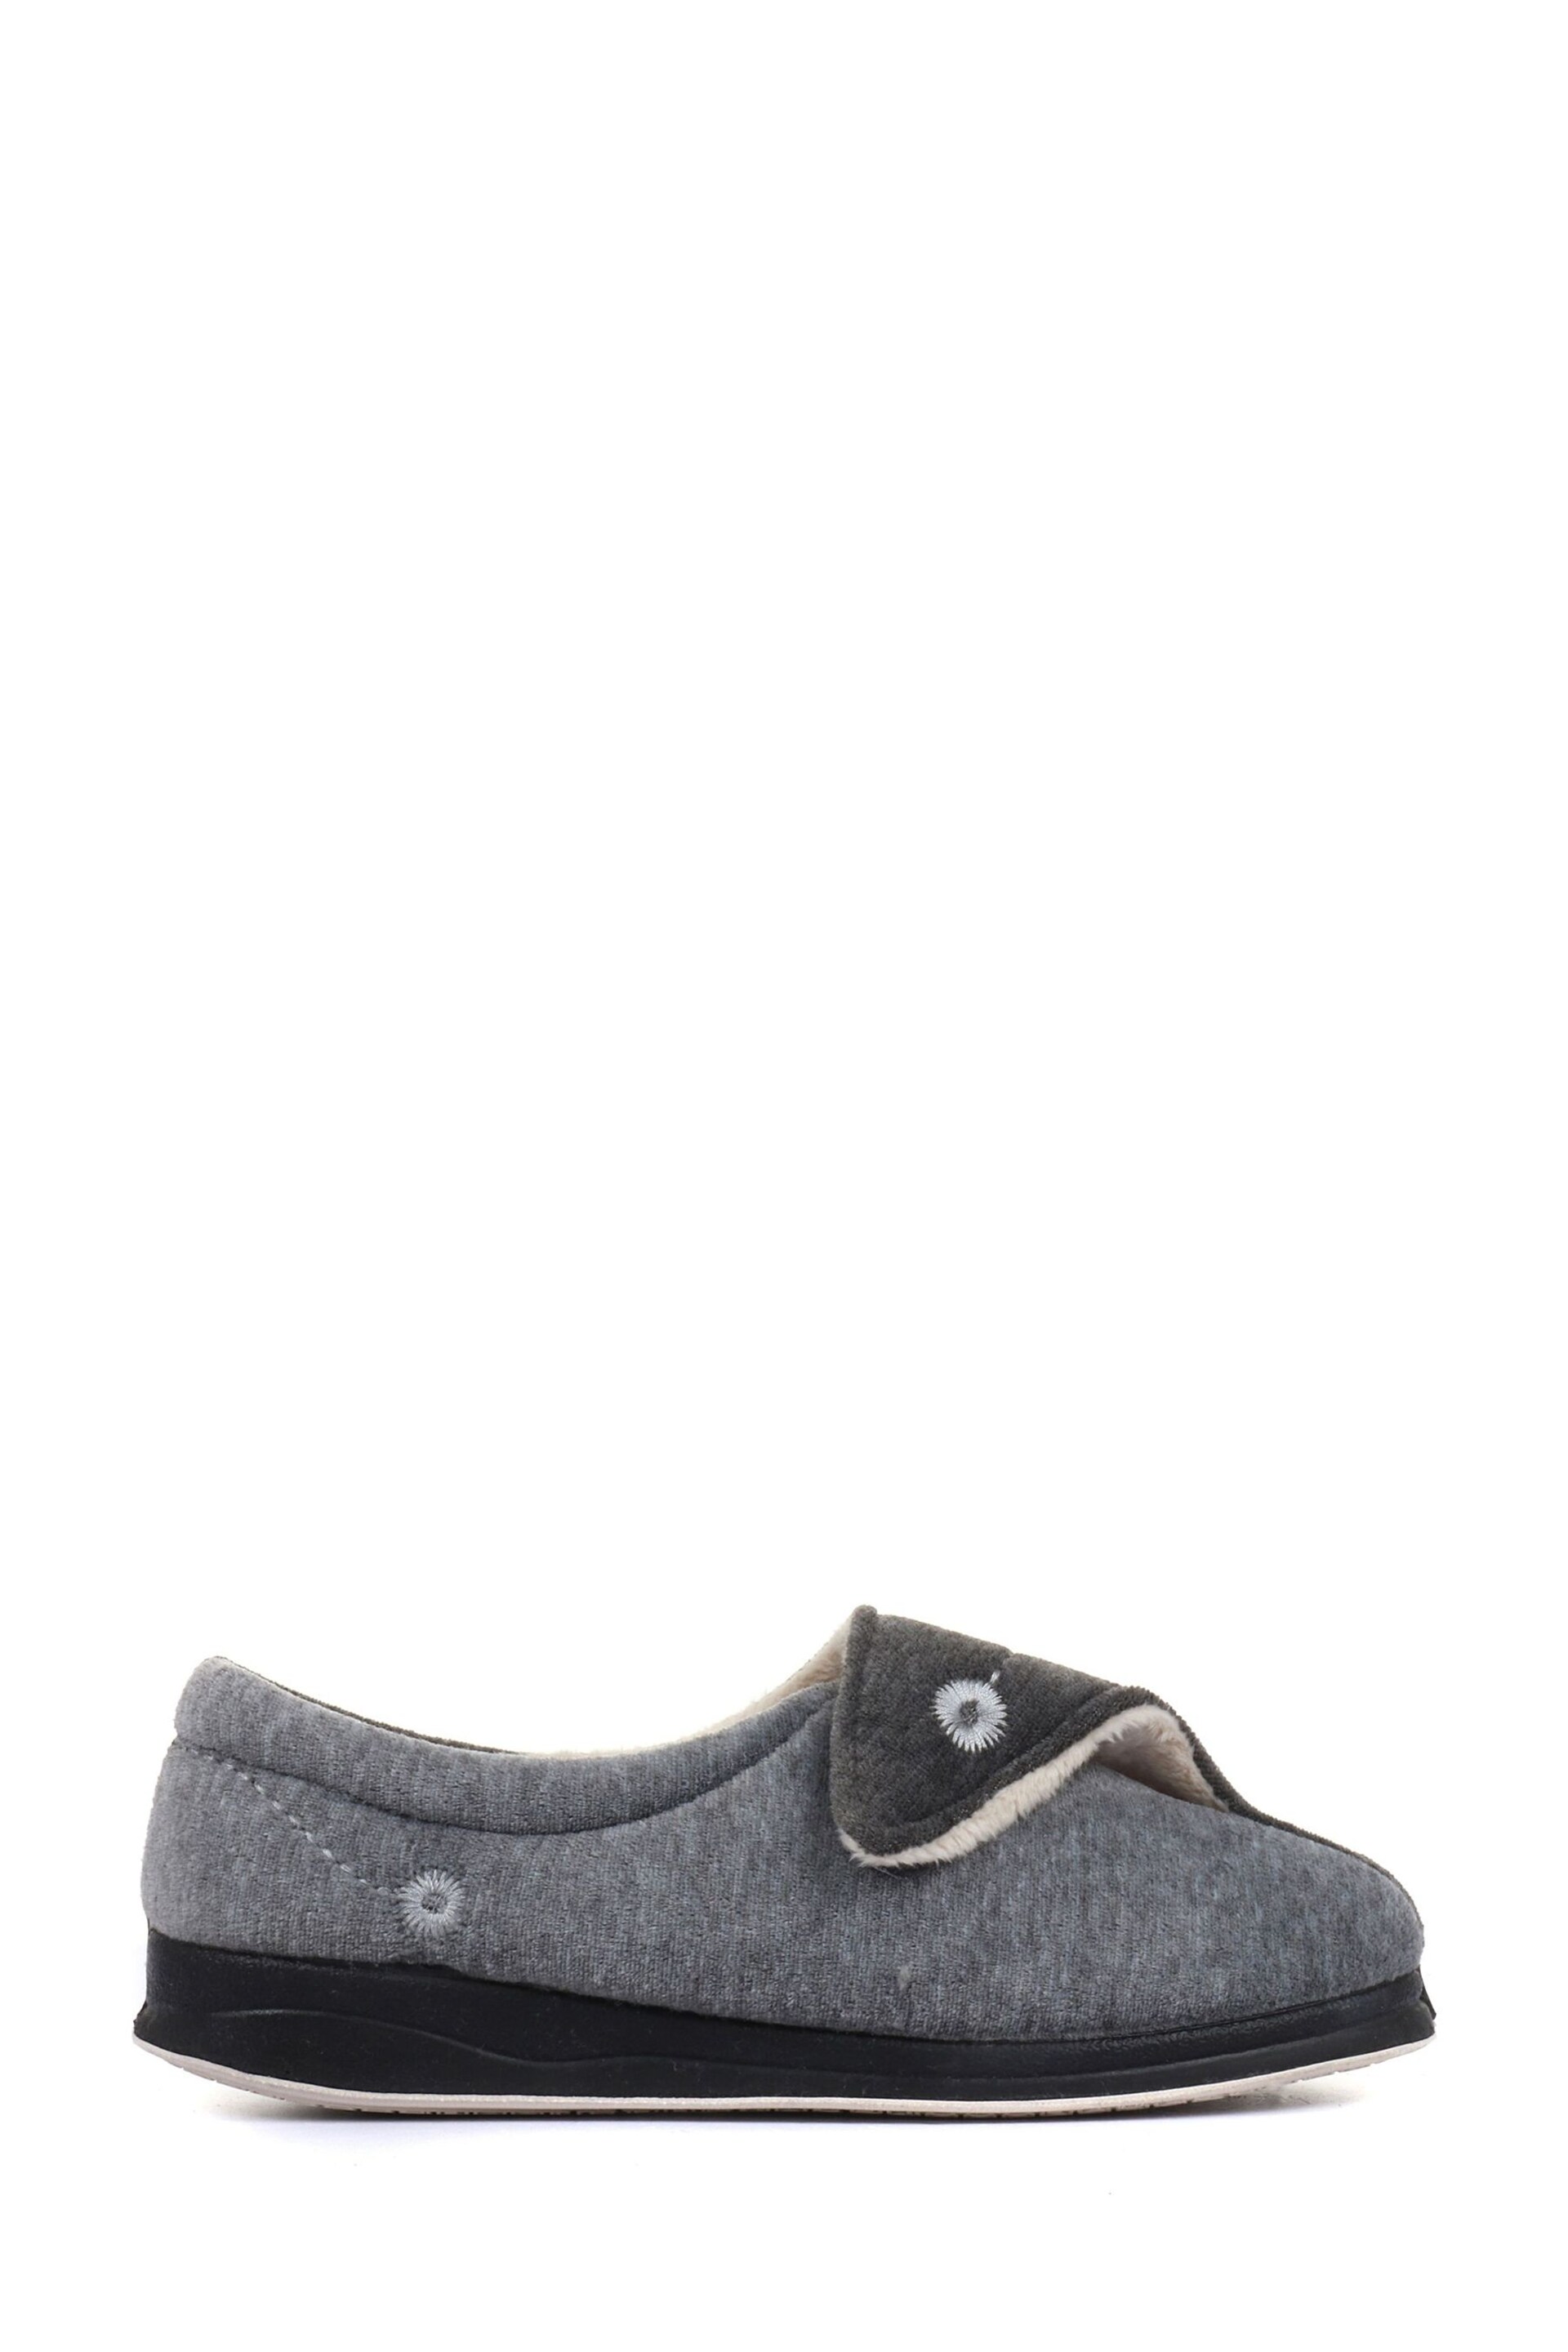 Pavers Grey Ladies Touch Fasten Full Slippers With Permalose Sole - Image 1 of 5